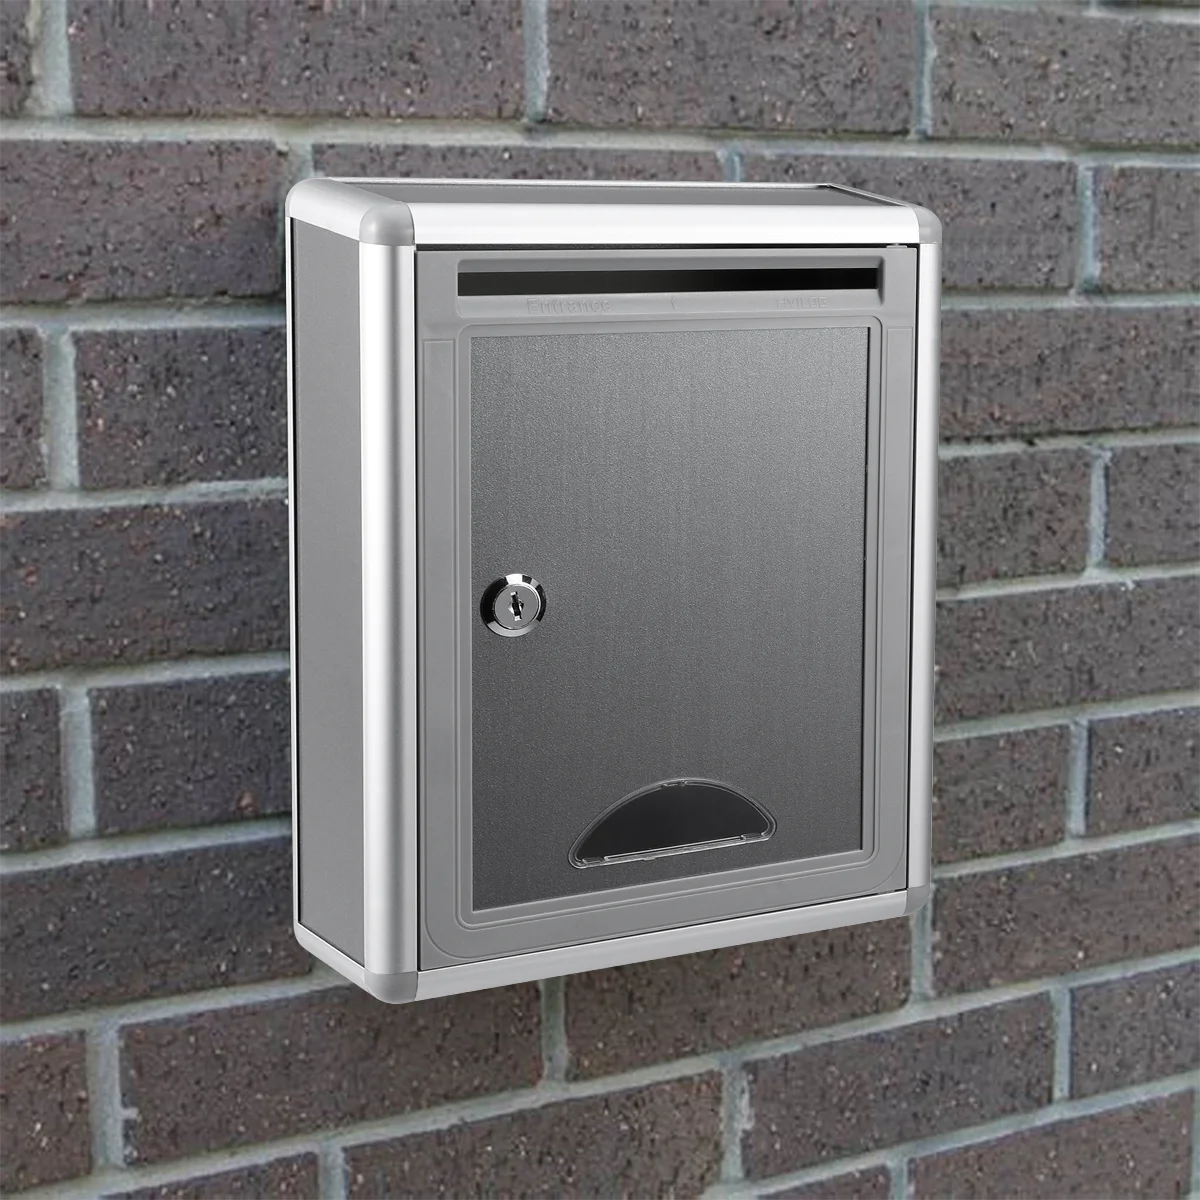 

Box Suggestion Mailbox Wall Drop Locklocking Mail Donation Boxes Mounted Metalhanging Ballot Post Mount Letter Stainless